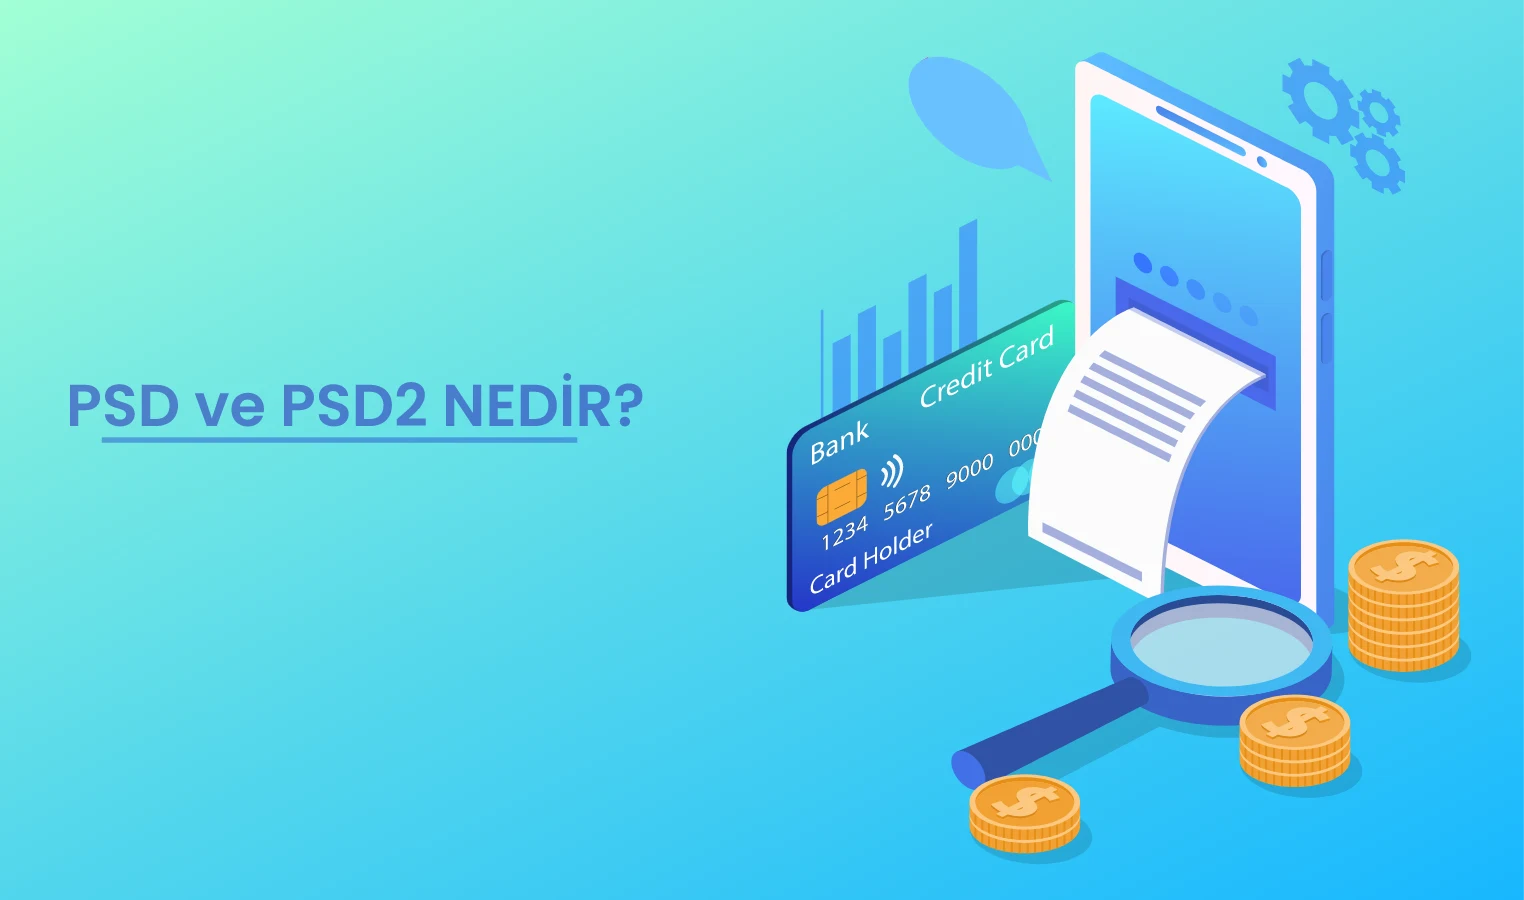 What are PSD and PSD2?